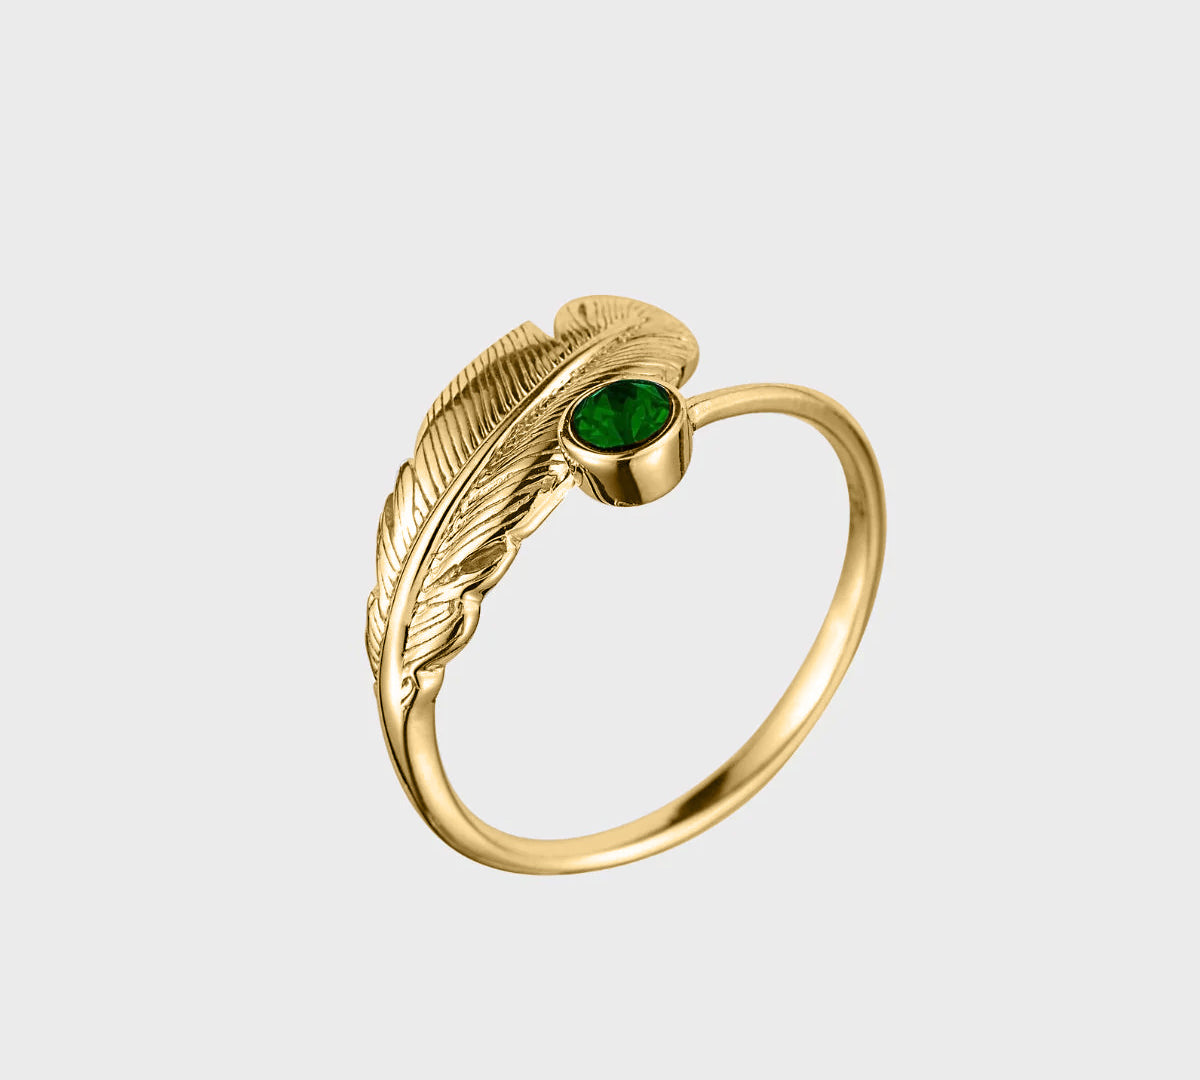 Adjustable Crystal Feather Birthstone Ring - May